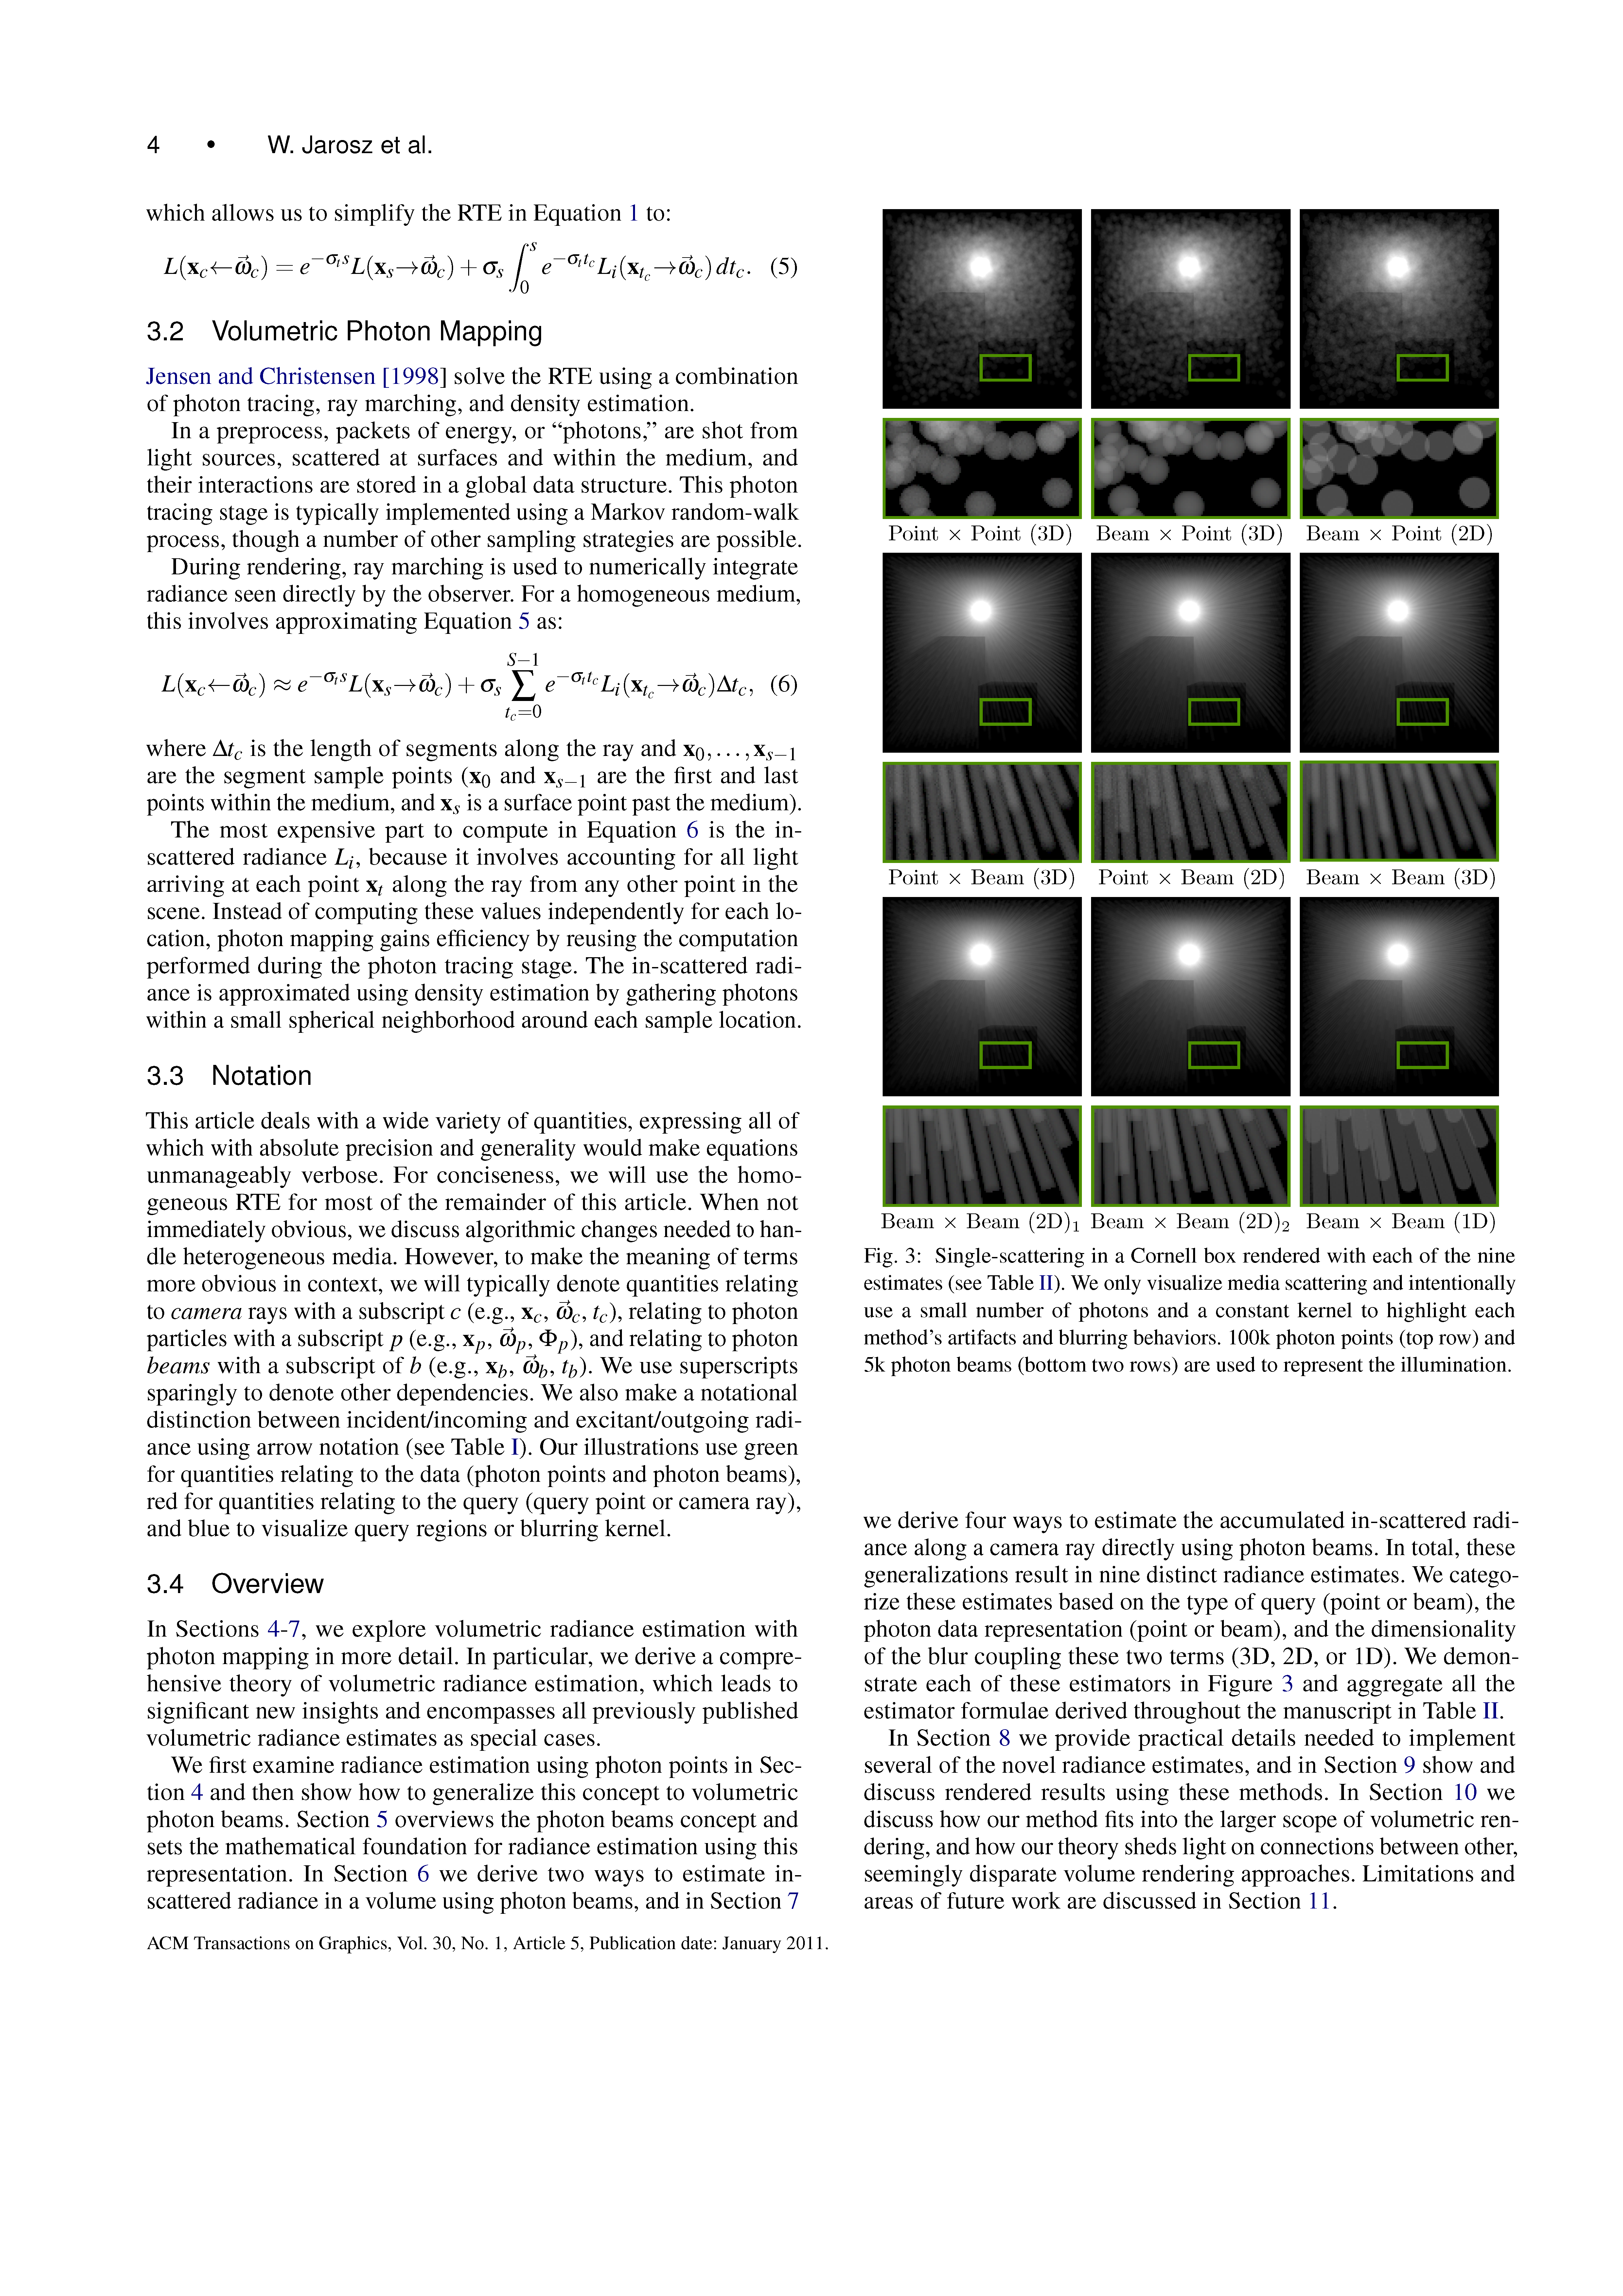 A Comprehensive Theory of Volumetric Radiance Estimation Using Photon Points and Beams Page 4